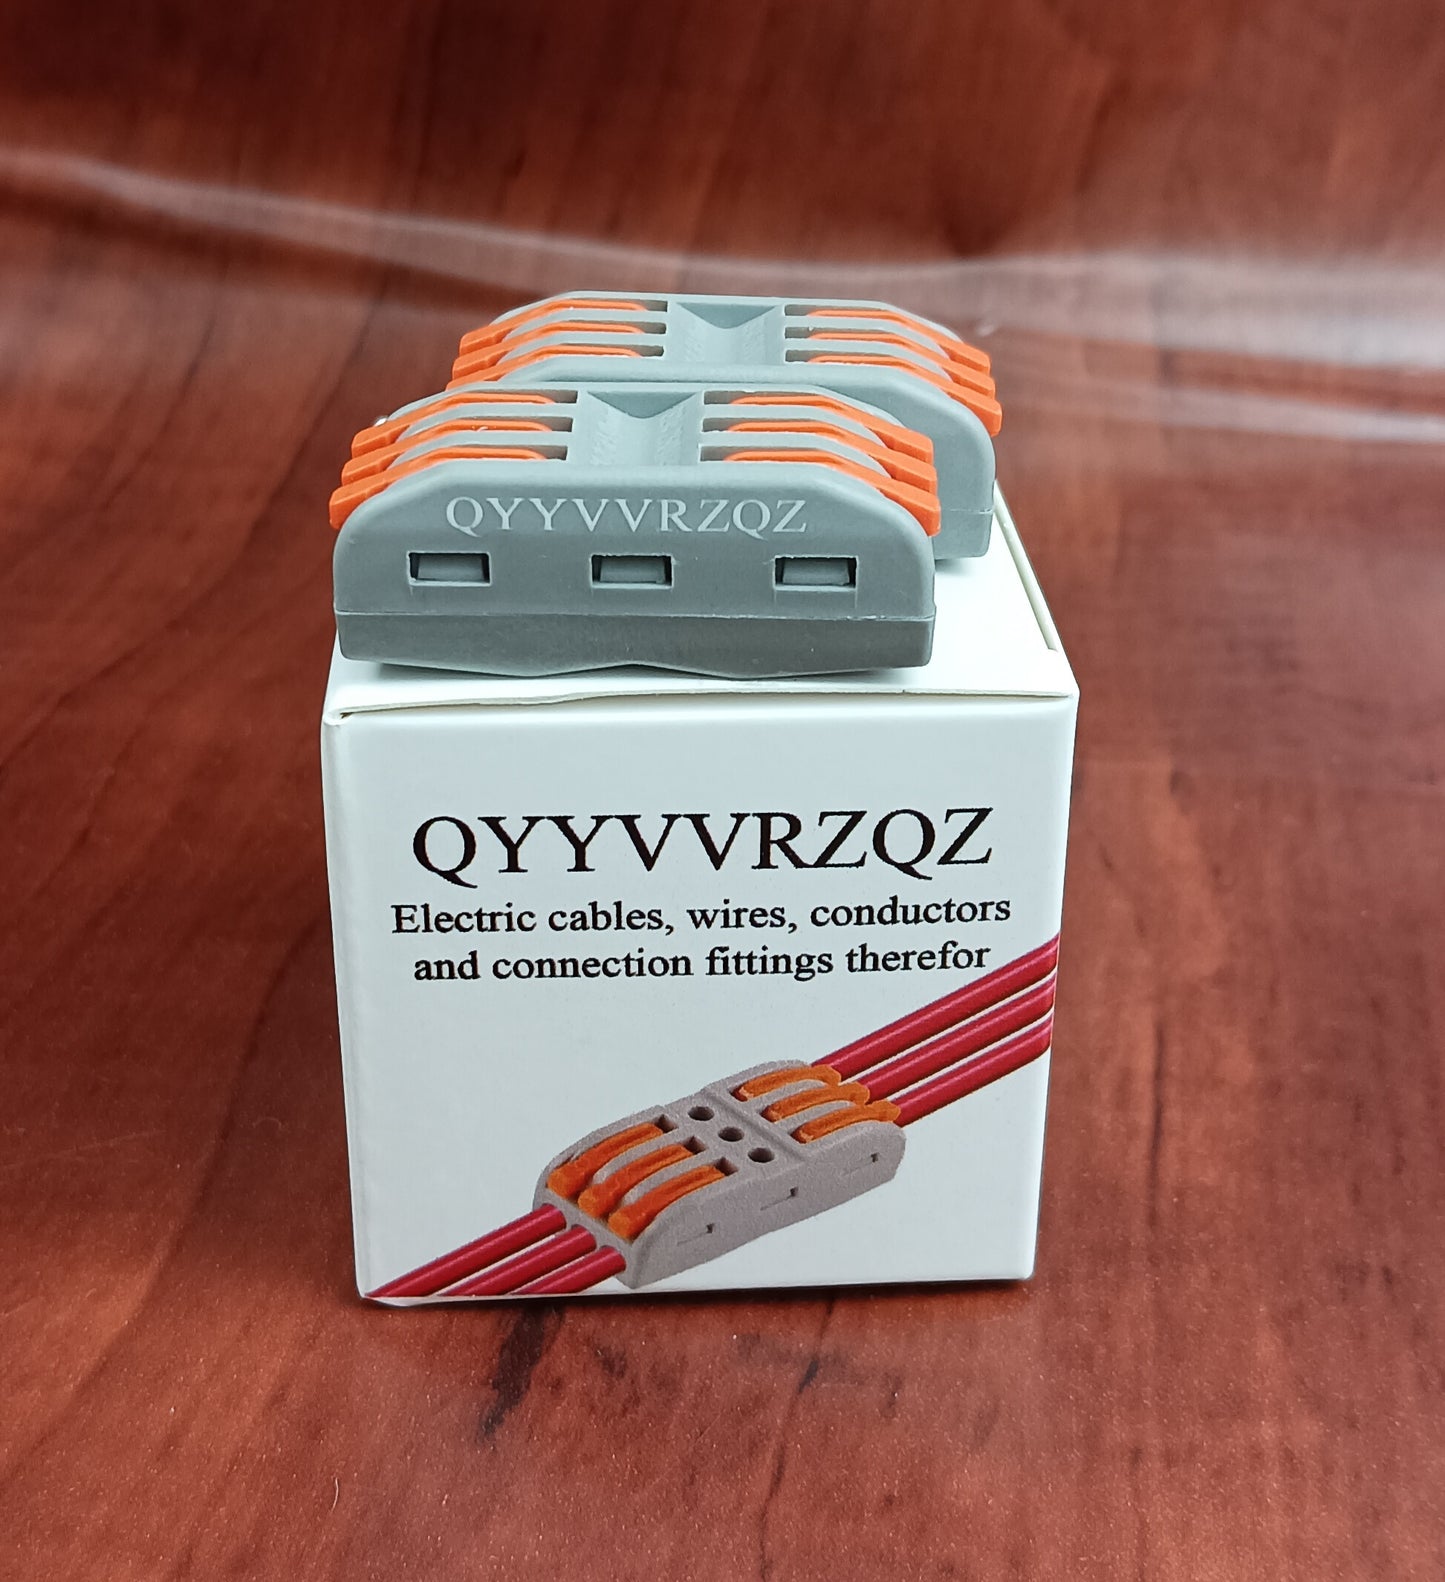 QYYVVRZQZ Electric cables, wires, conductors and connection fittings therefor Quick wiring terminal T-connector wire connector wiring god wire connector snap electrician wiring with